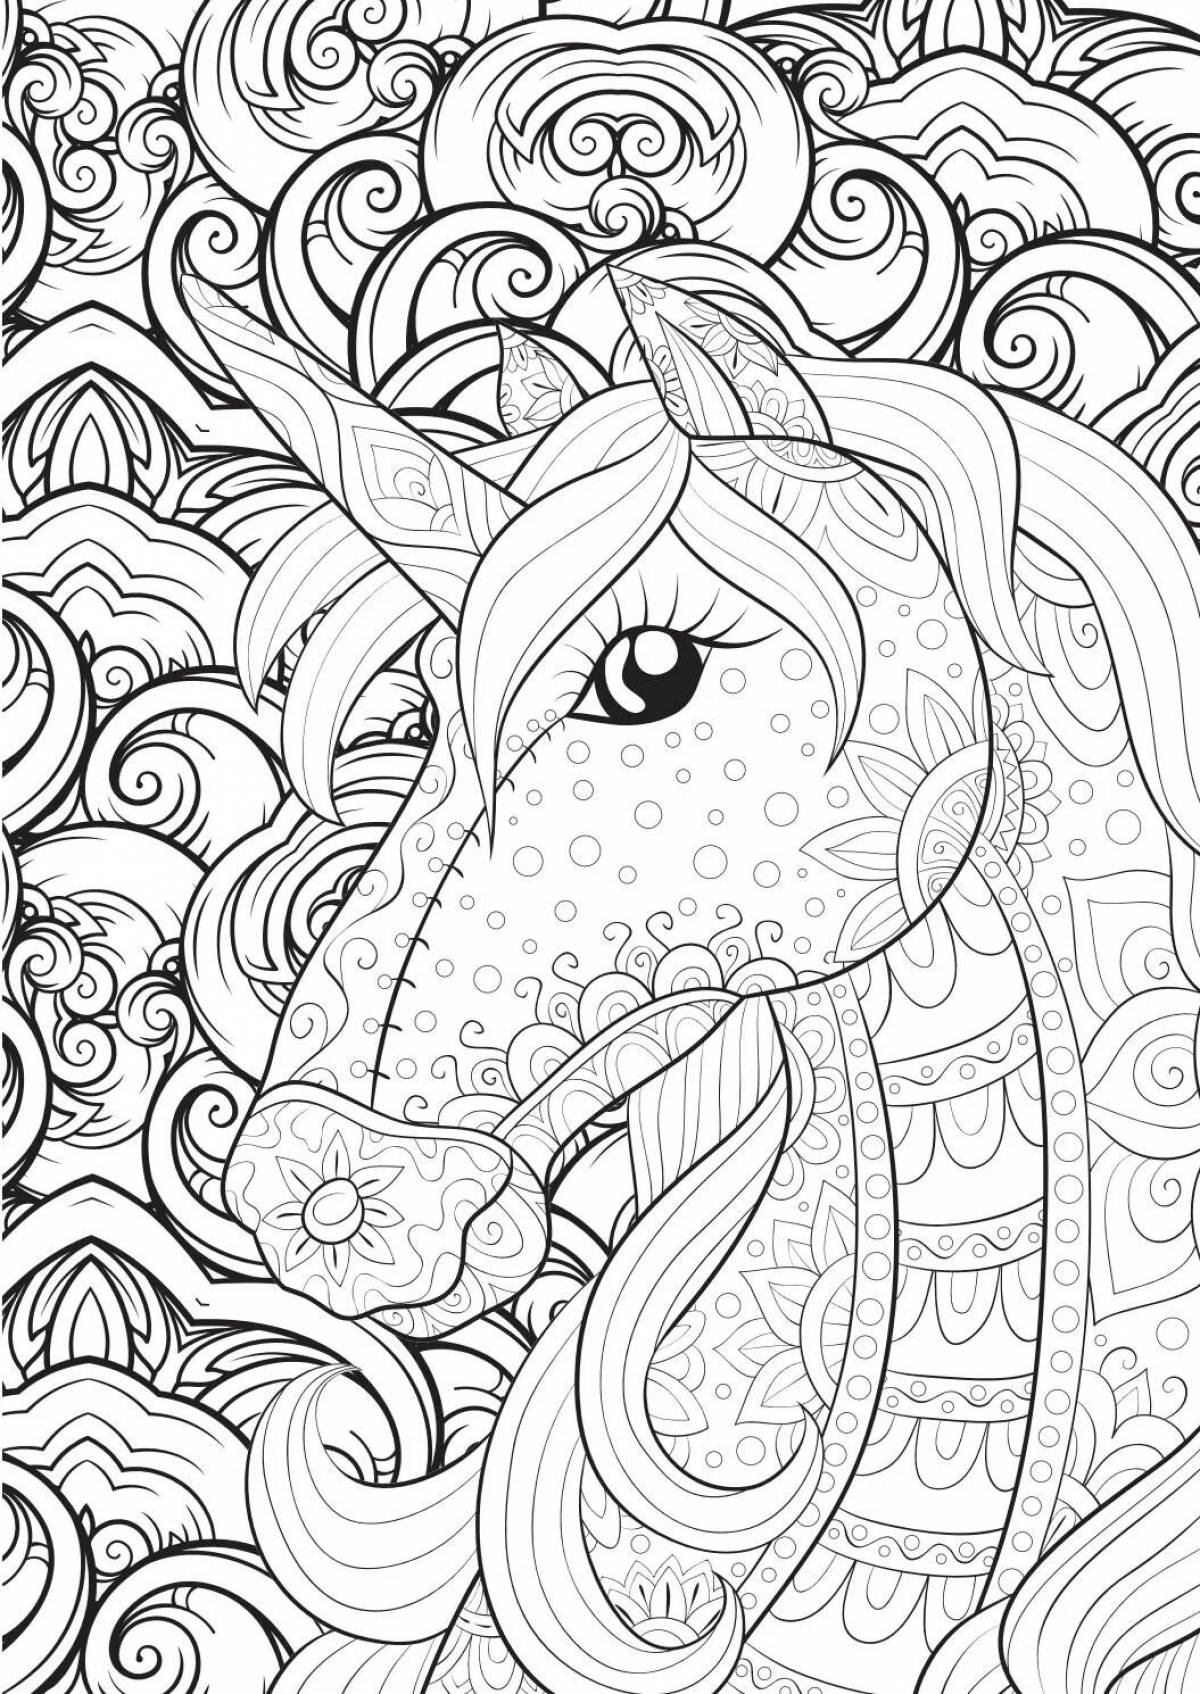 Fancy coloring unicorn antistress for kids